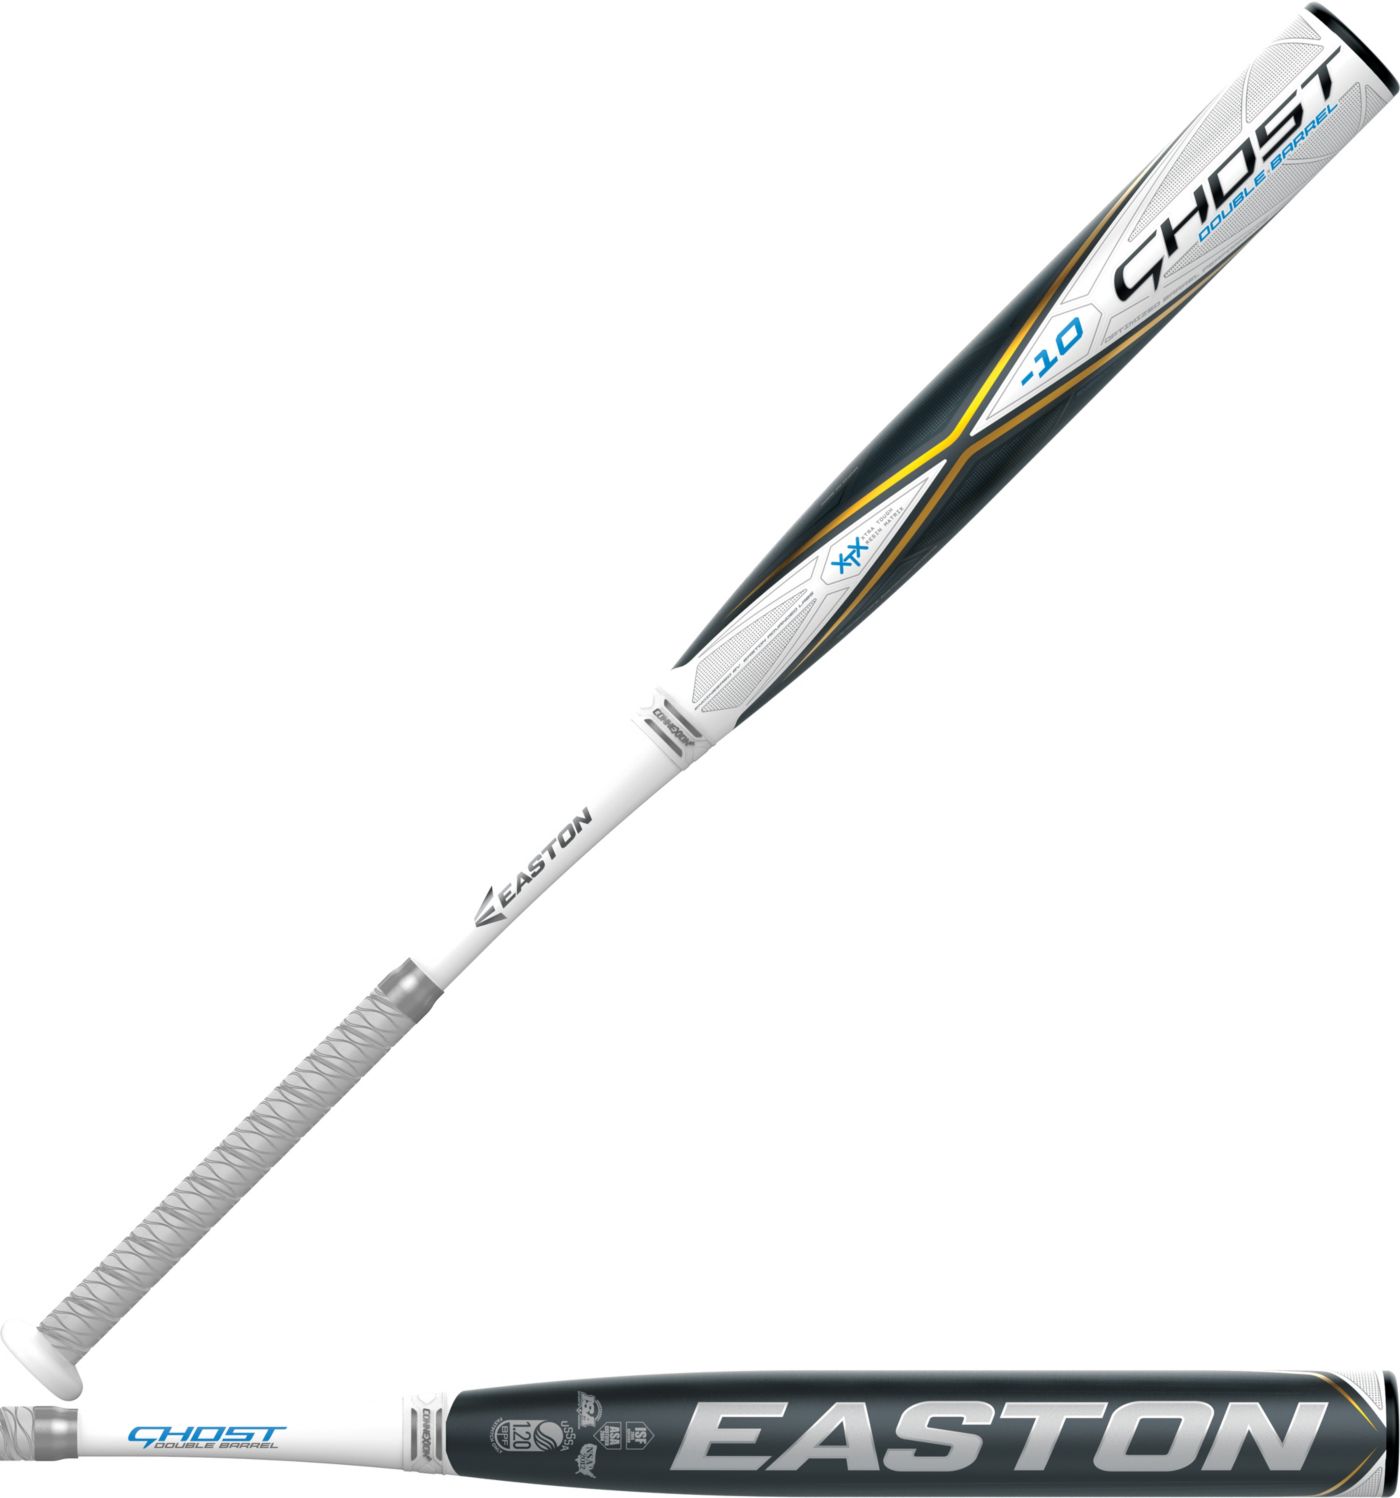 Easton Ghost Fastpitch Bat 2020 Free Shipping at DICK'S